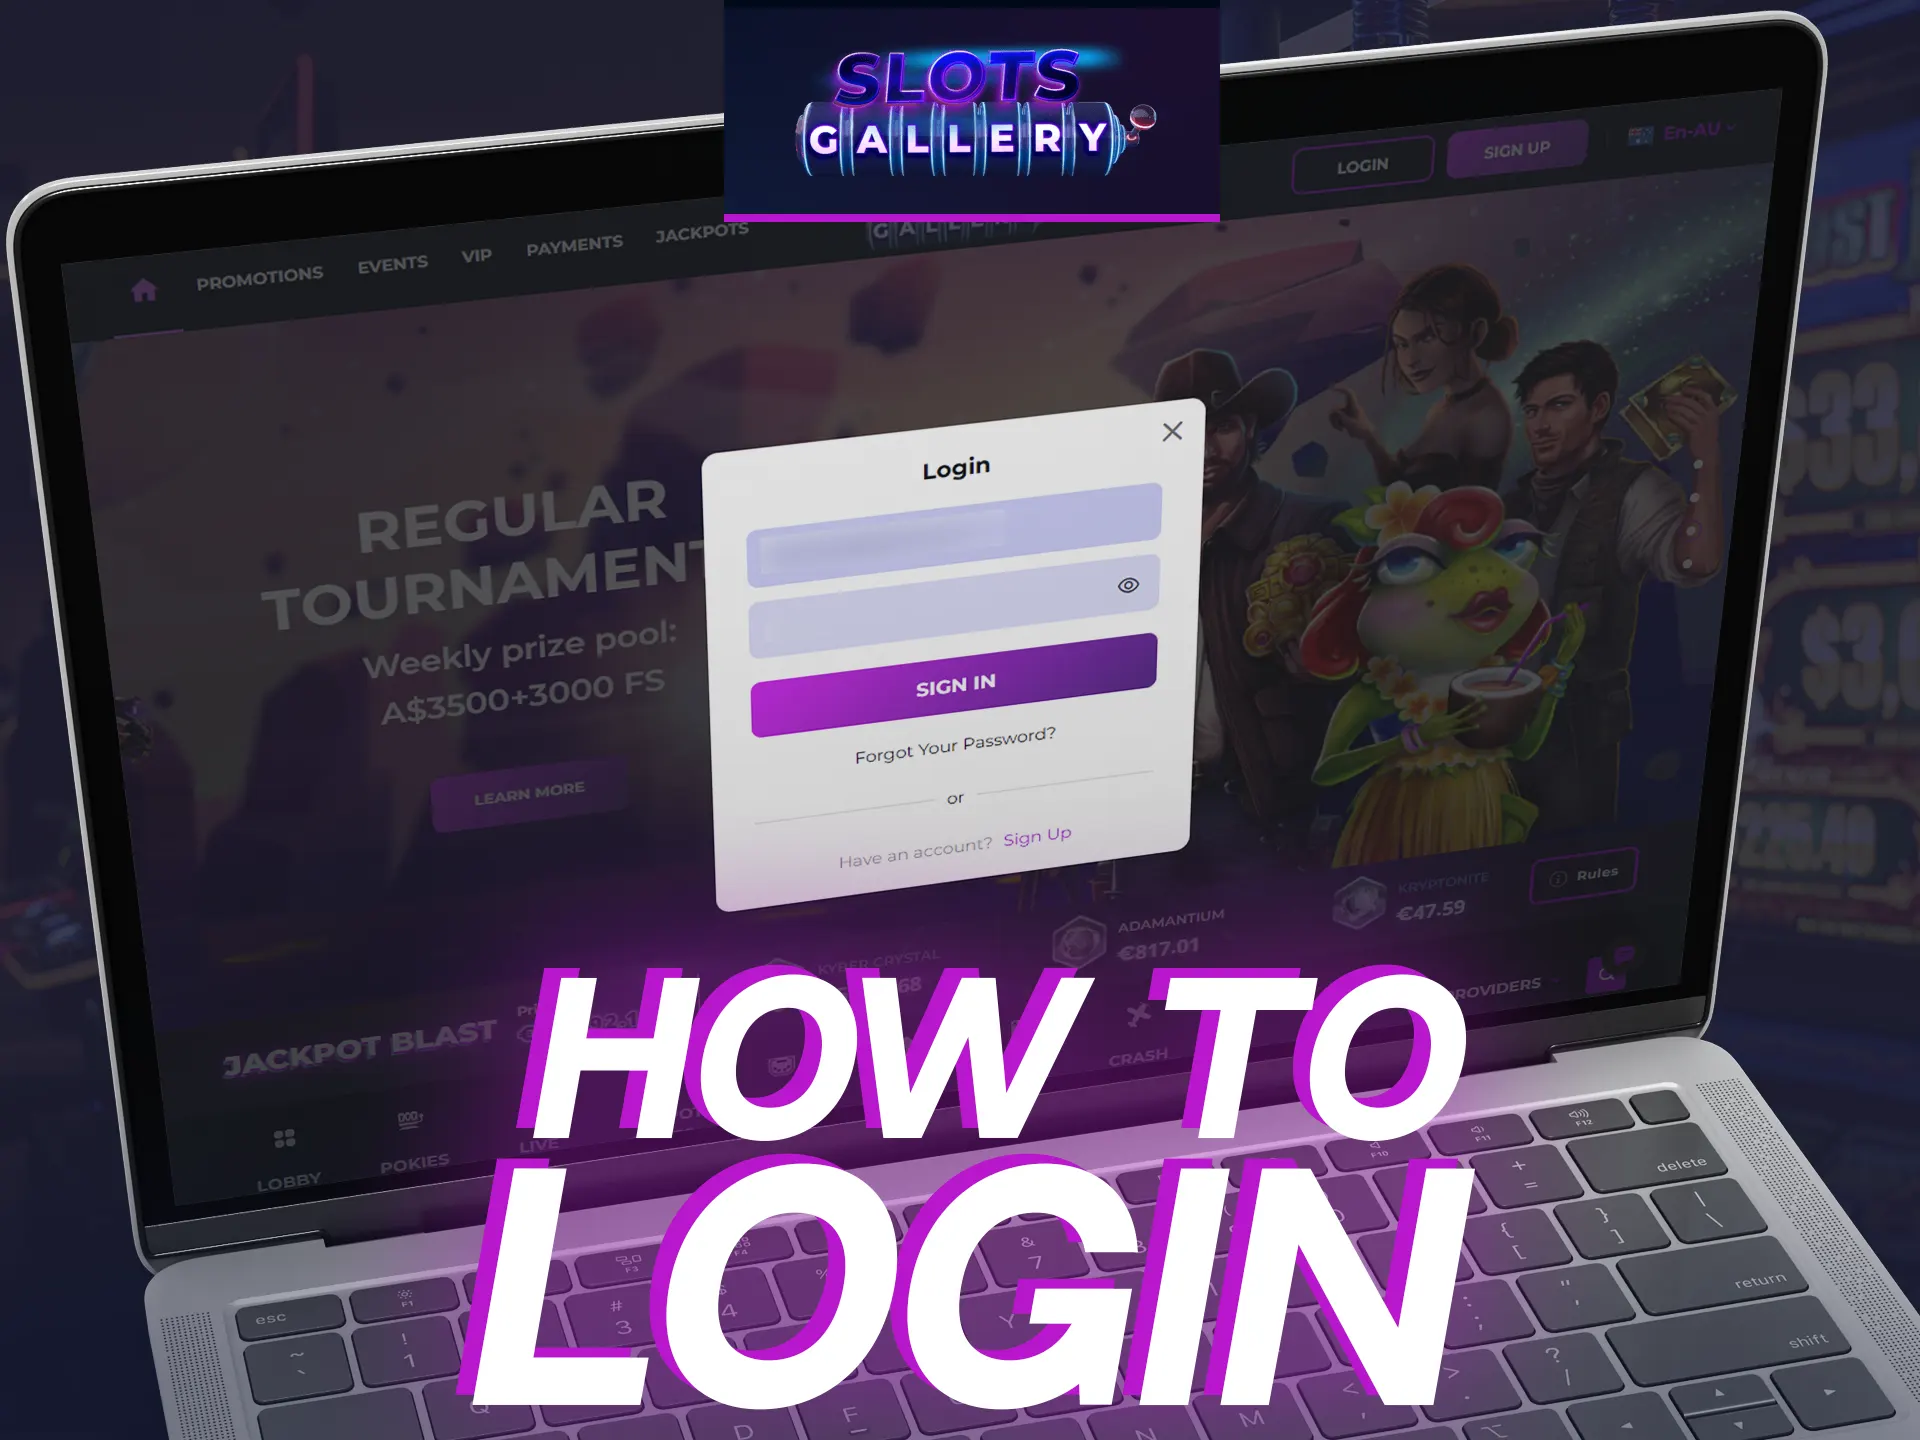 Check how to login at Slots Gallry website.